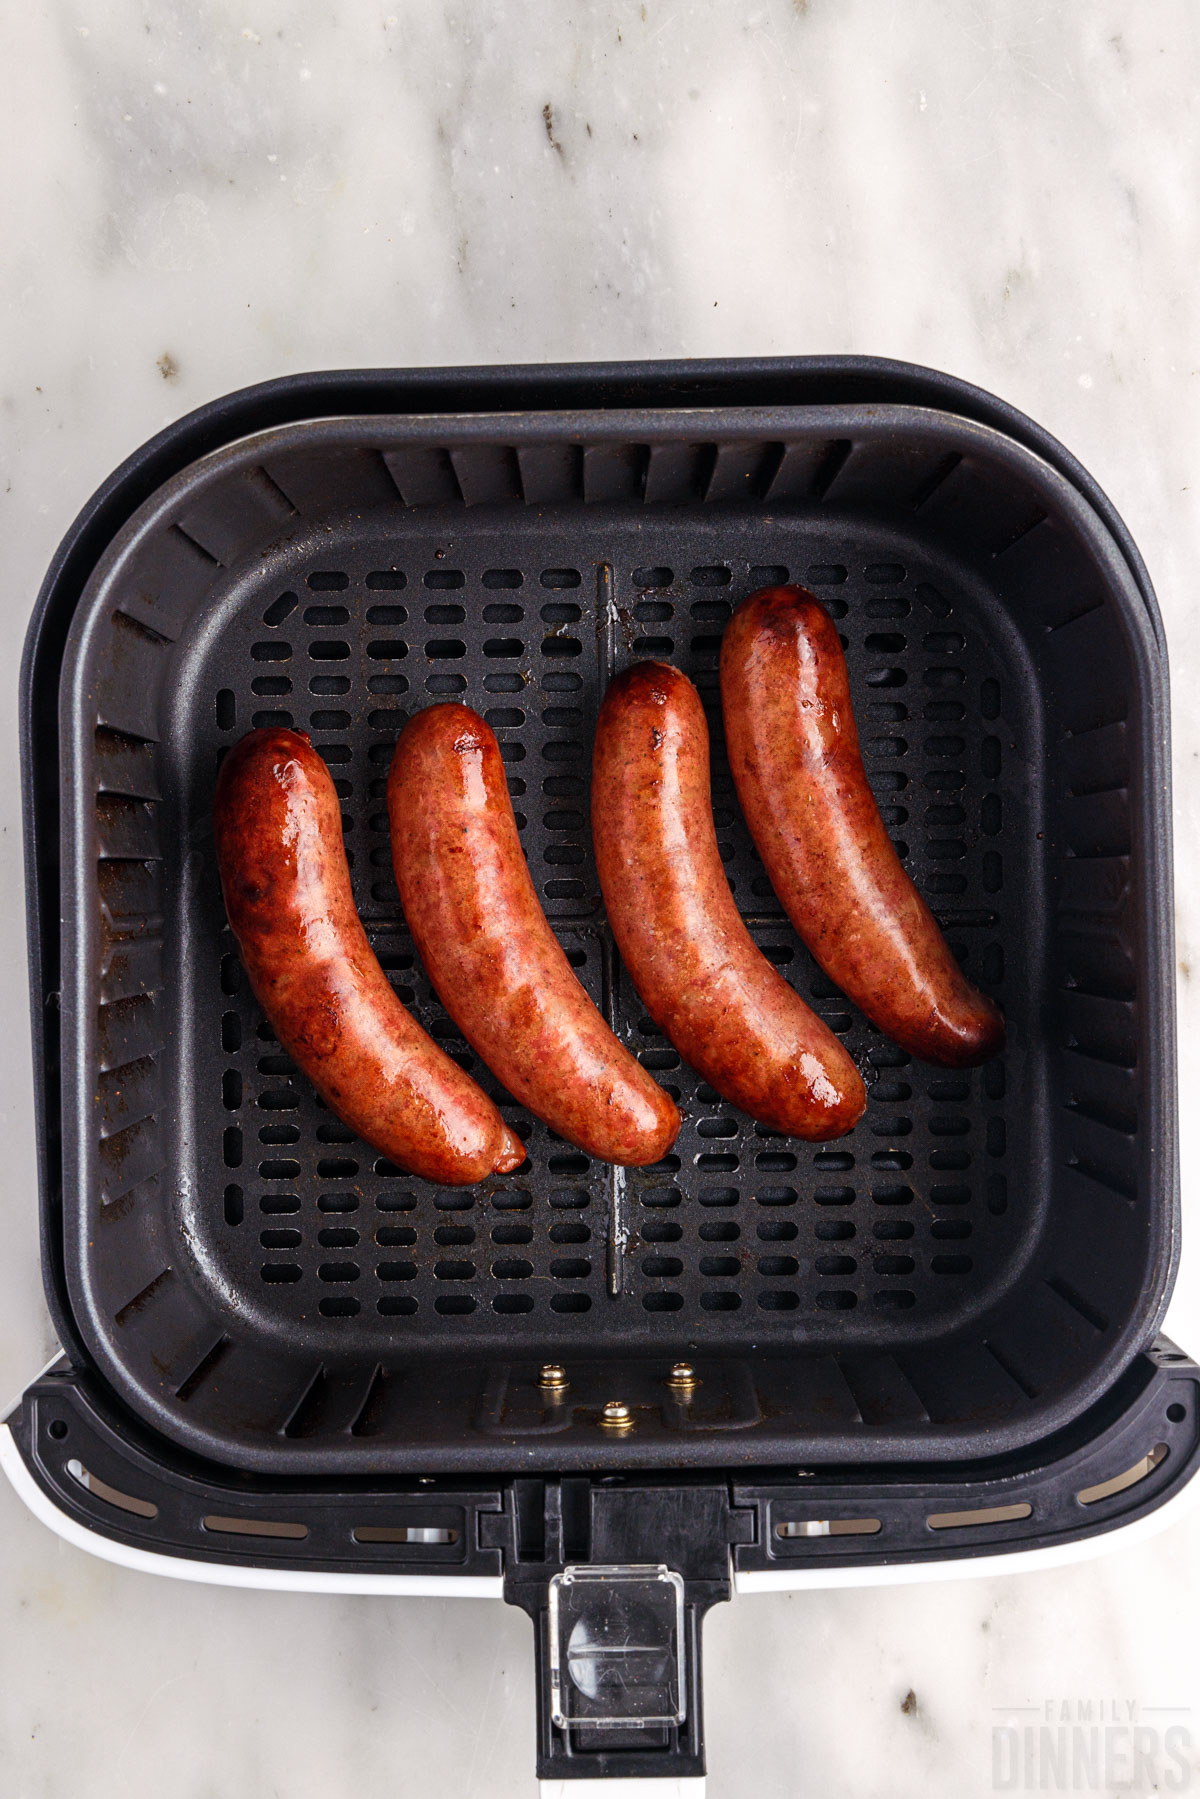 cooked sausages in the air fryer